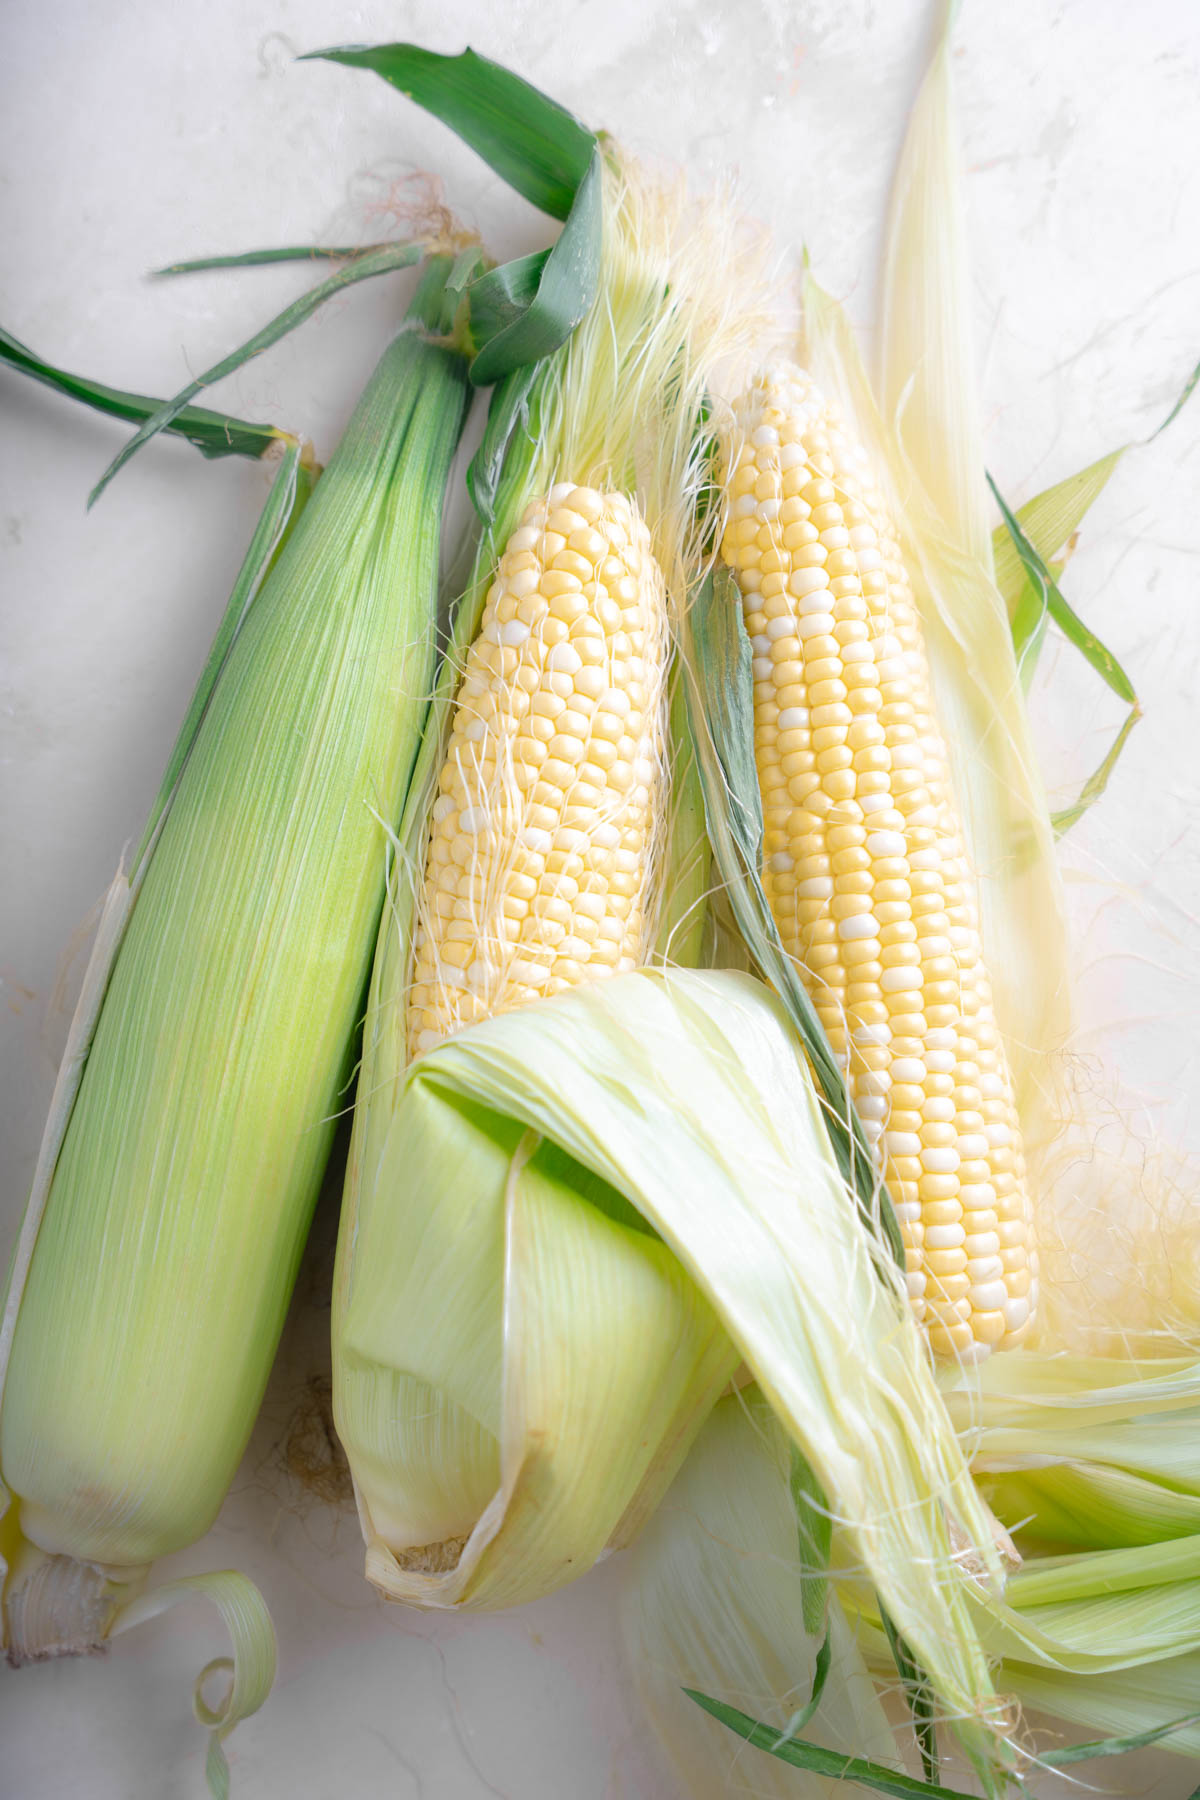 Corn on the cob with some of the silks peeled down to see the creamy white kernels